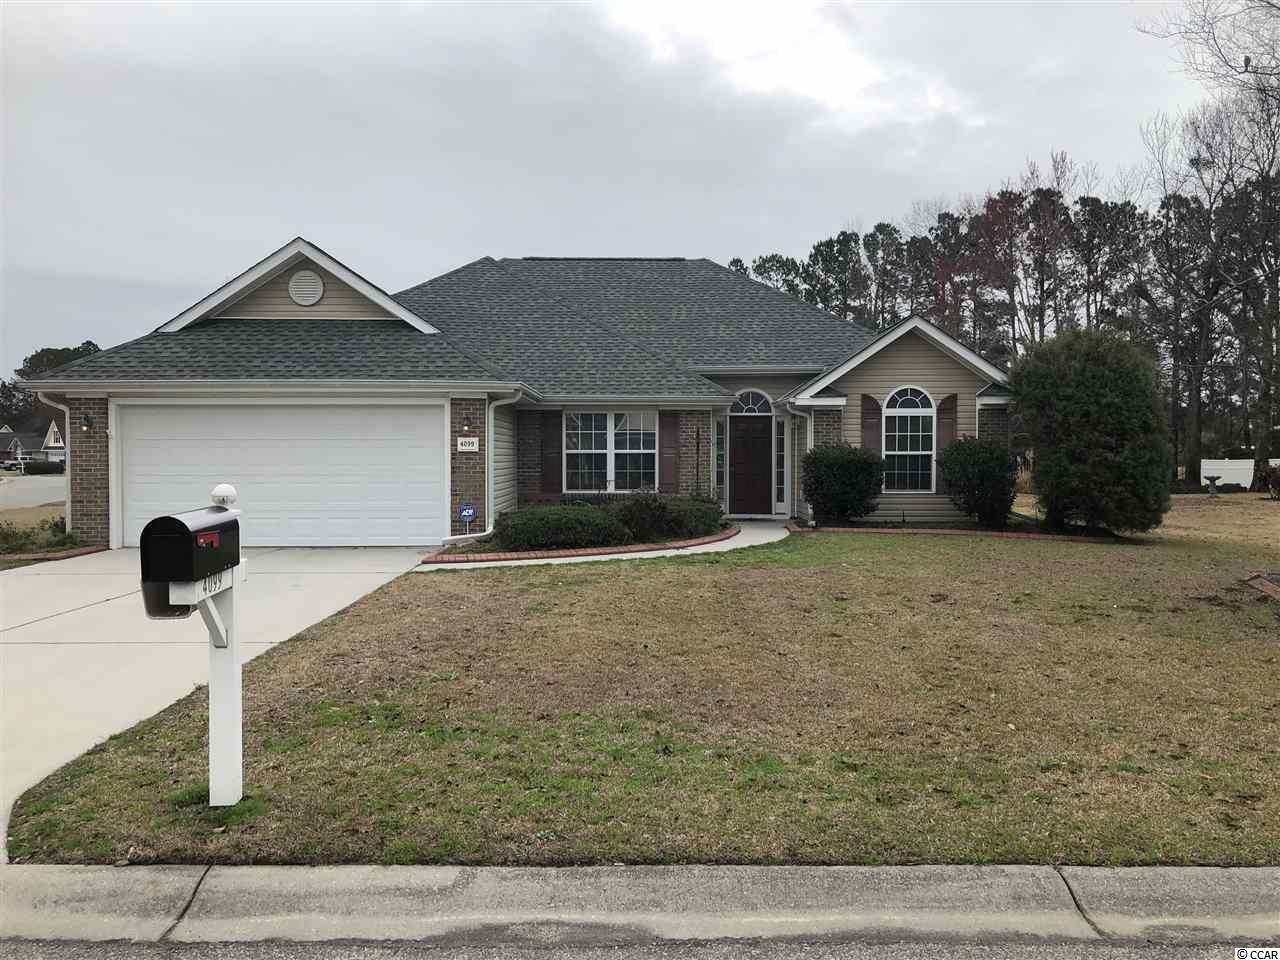 4099 Steeple Chase Dr. Myrtle Beach, SC 29588